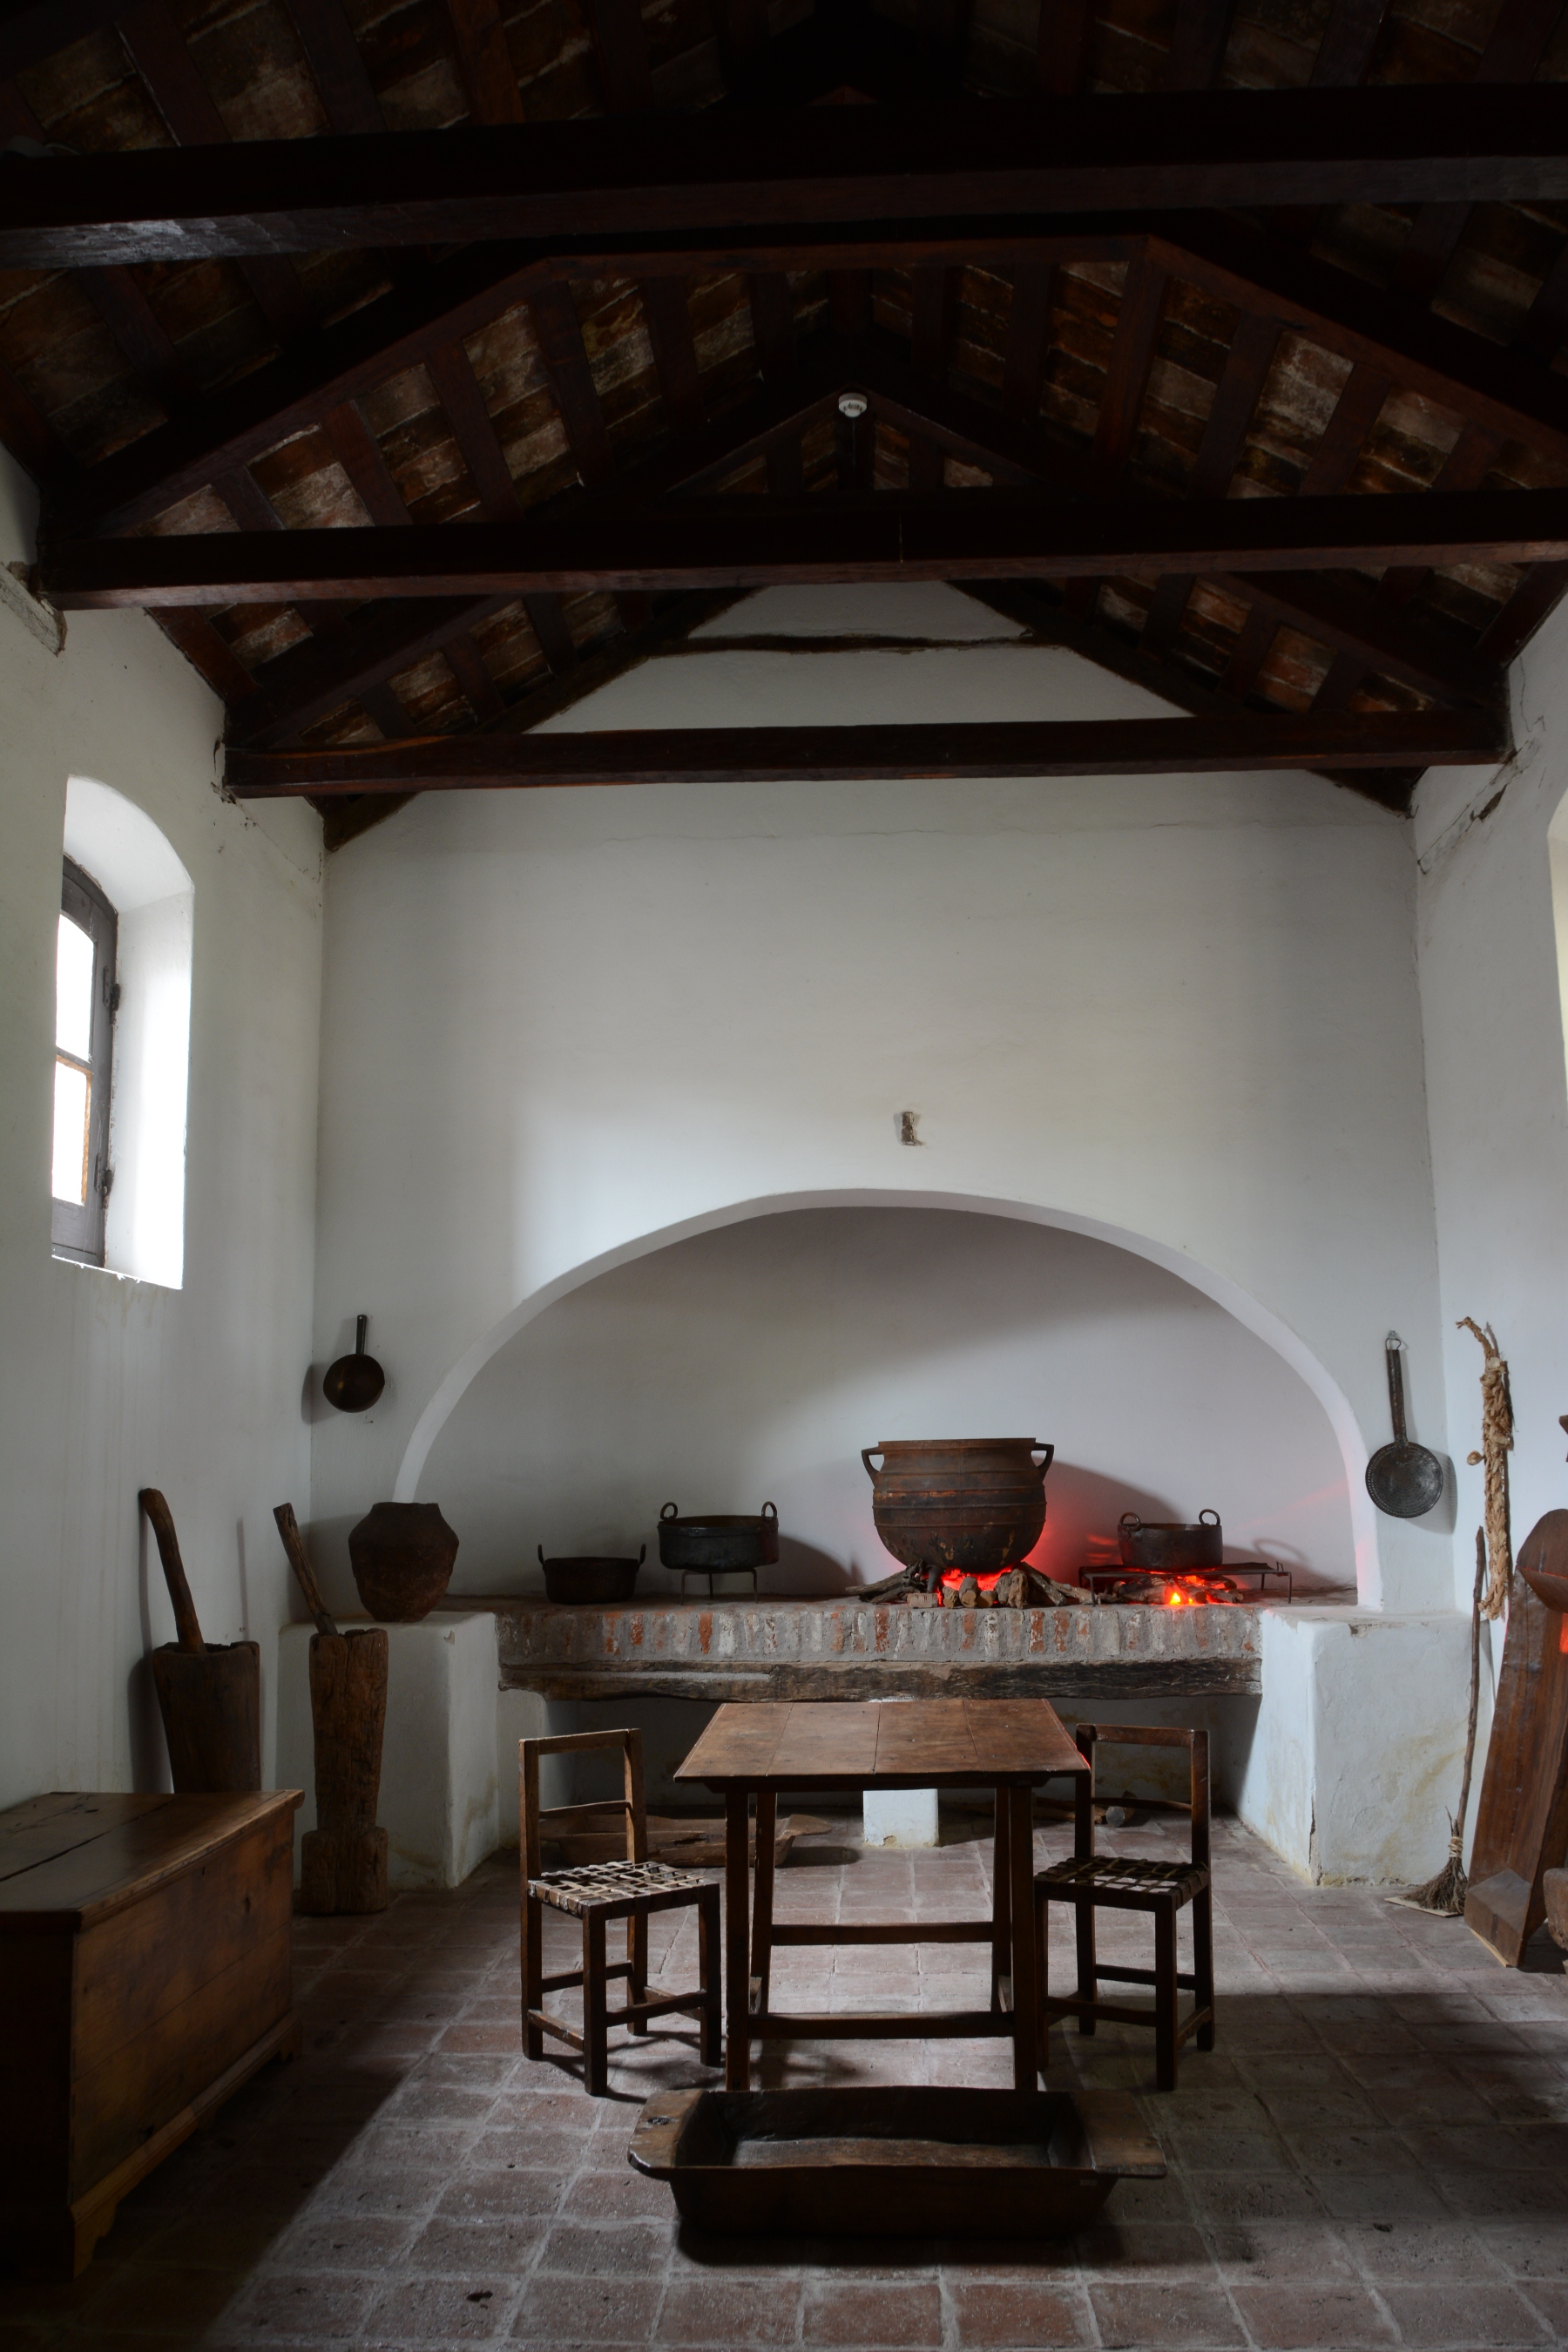 Estancia Jesuitica de Alta Gracia. Kitchen and larder of the house of Liniers/ view of one of the museum´s halls with a colonial atmosphere. Photo: National Museum Estancia Jesuitica de Alta Gracia and house of Viceroy Liniers